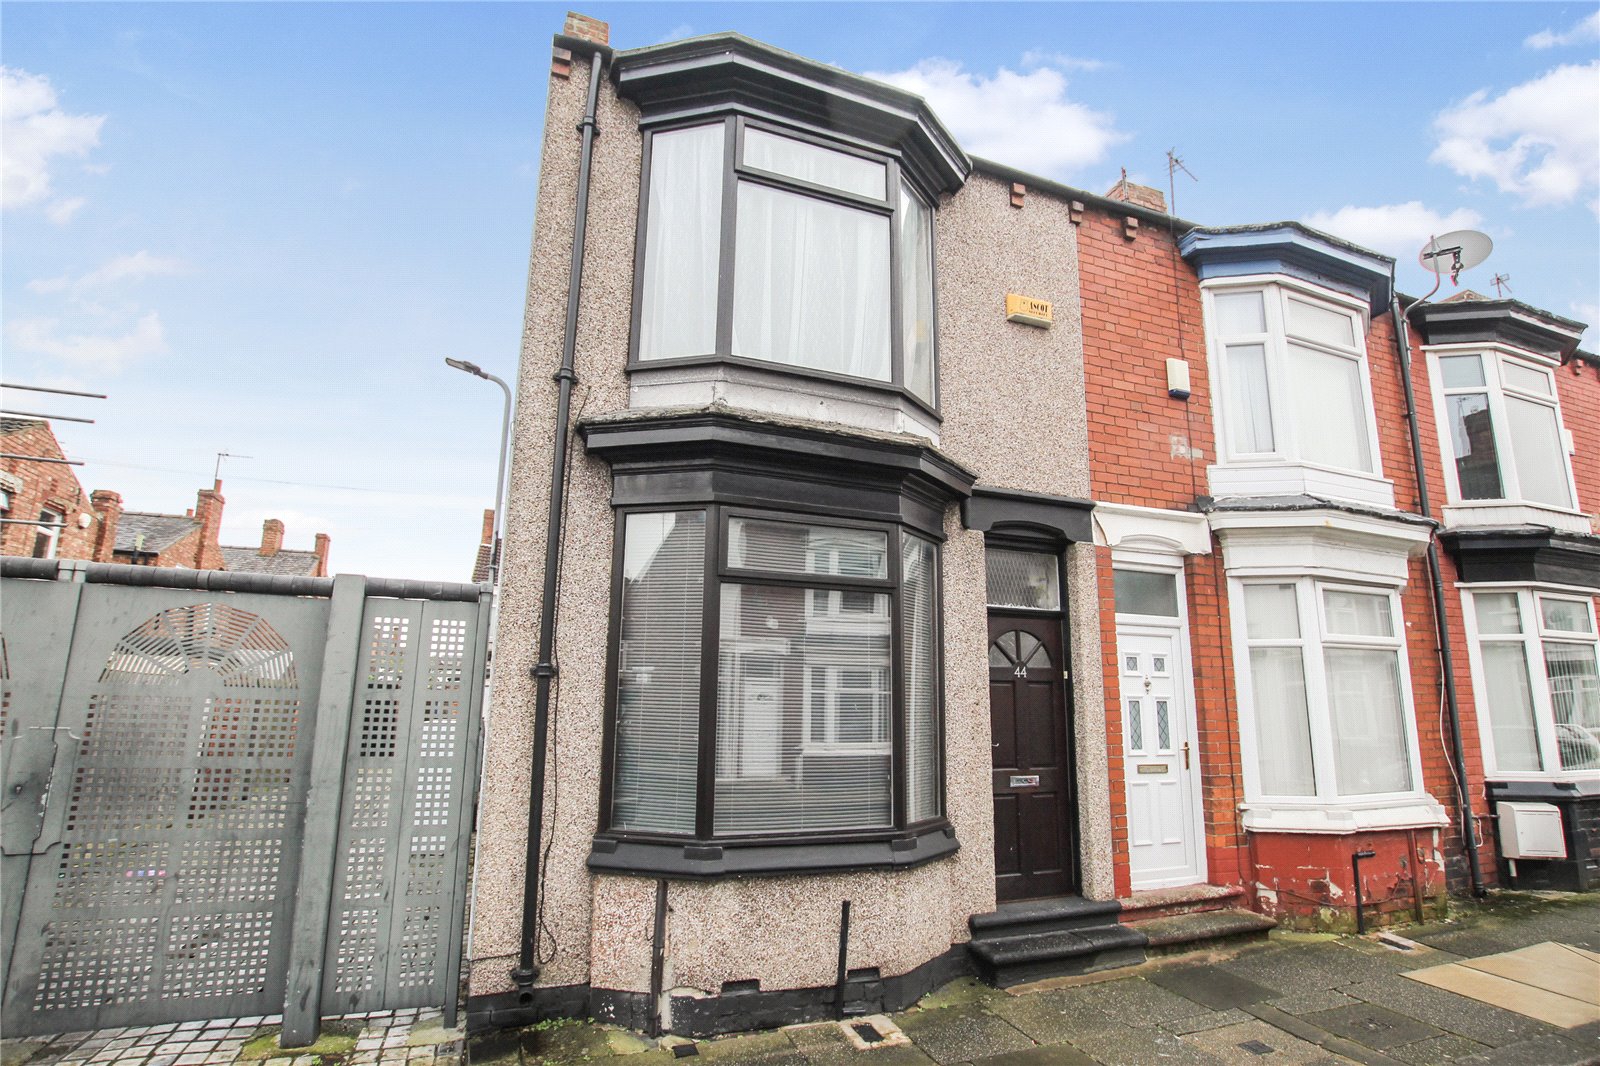 2 bed house for sale in Brompton Street, Linthorpe Village - Property Image 1